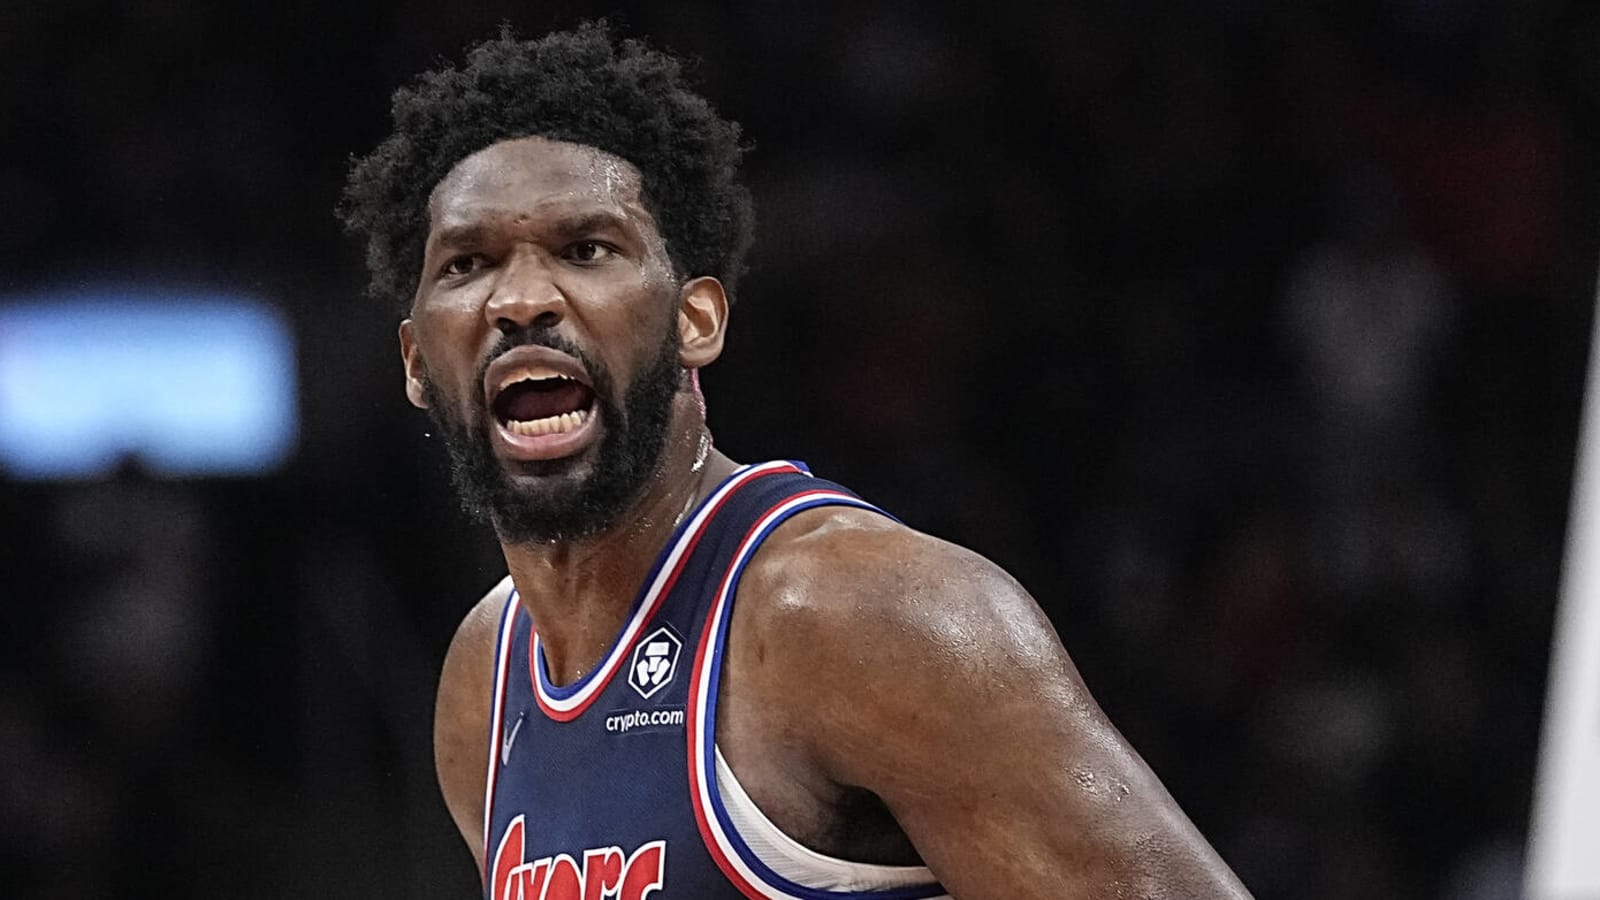 Embiid listed as out for Game 3, but status could change